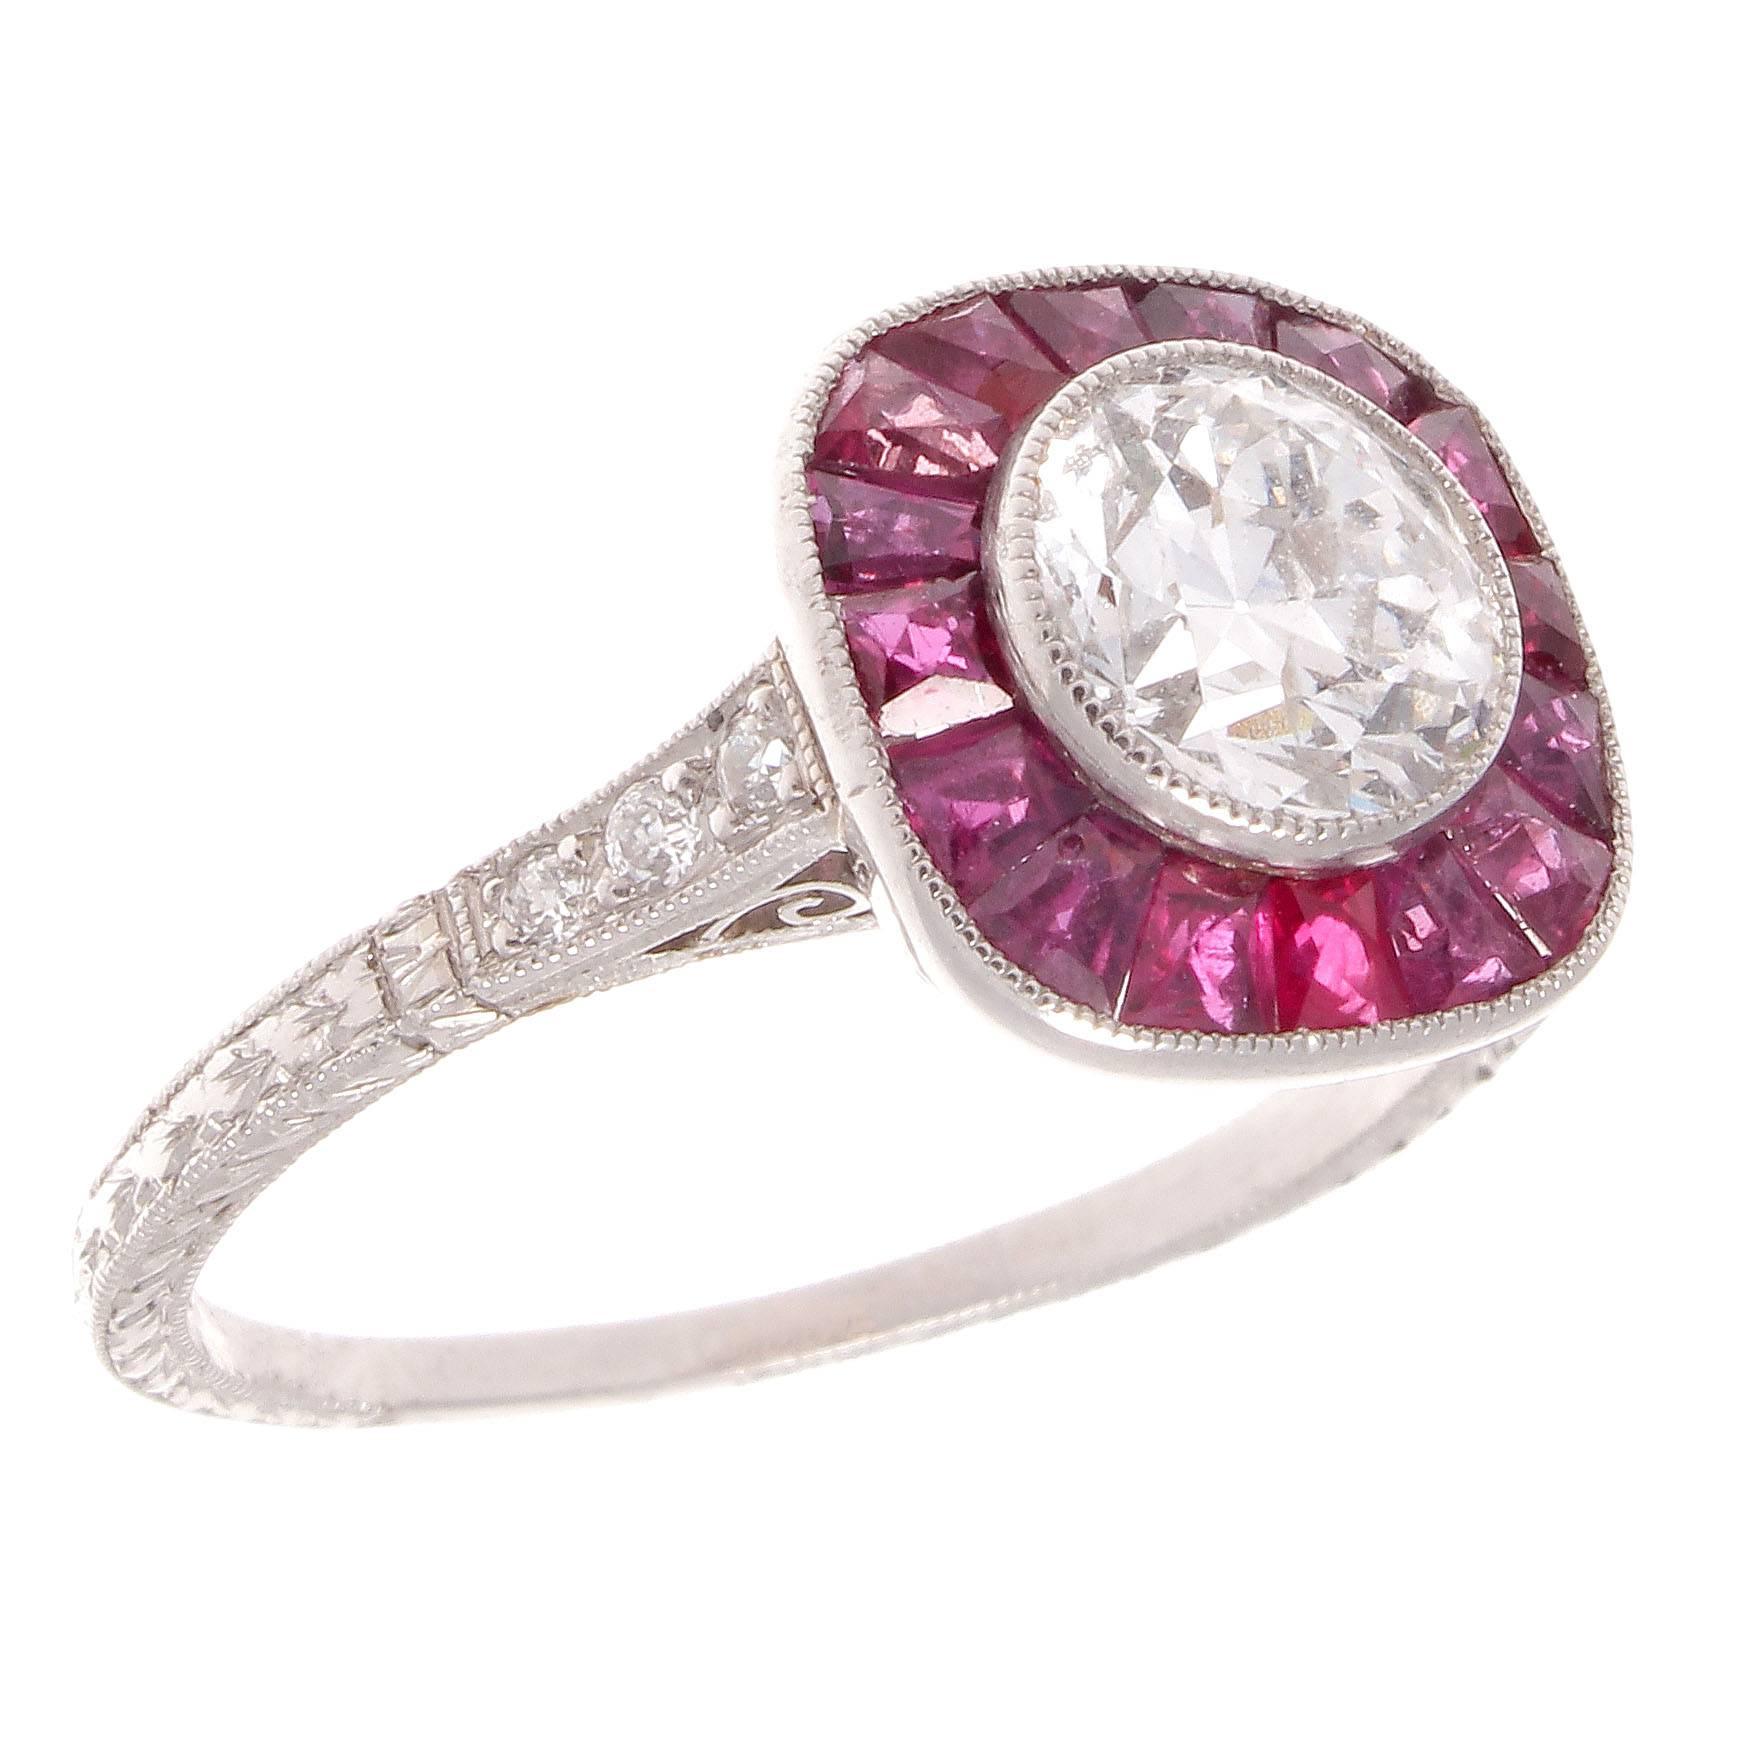 Add some color to your life with this extremely well made Art Deco inspired ring. Featuring a 1.05 carat old European cut diamond that is G color and SI2 clarity. The diamond is surrounded by a halo of 16 well matched sparkling rubies weighing